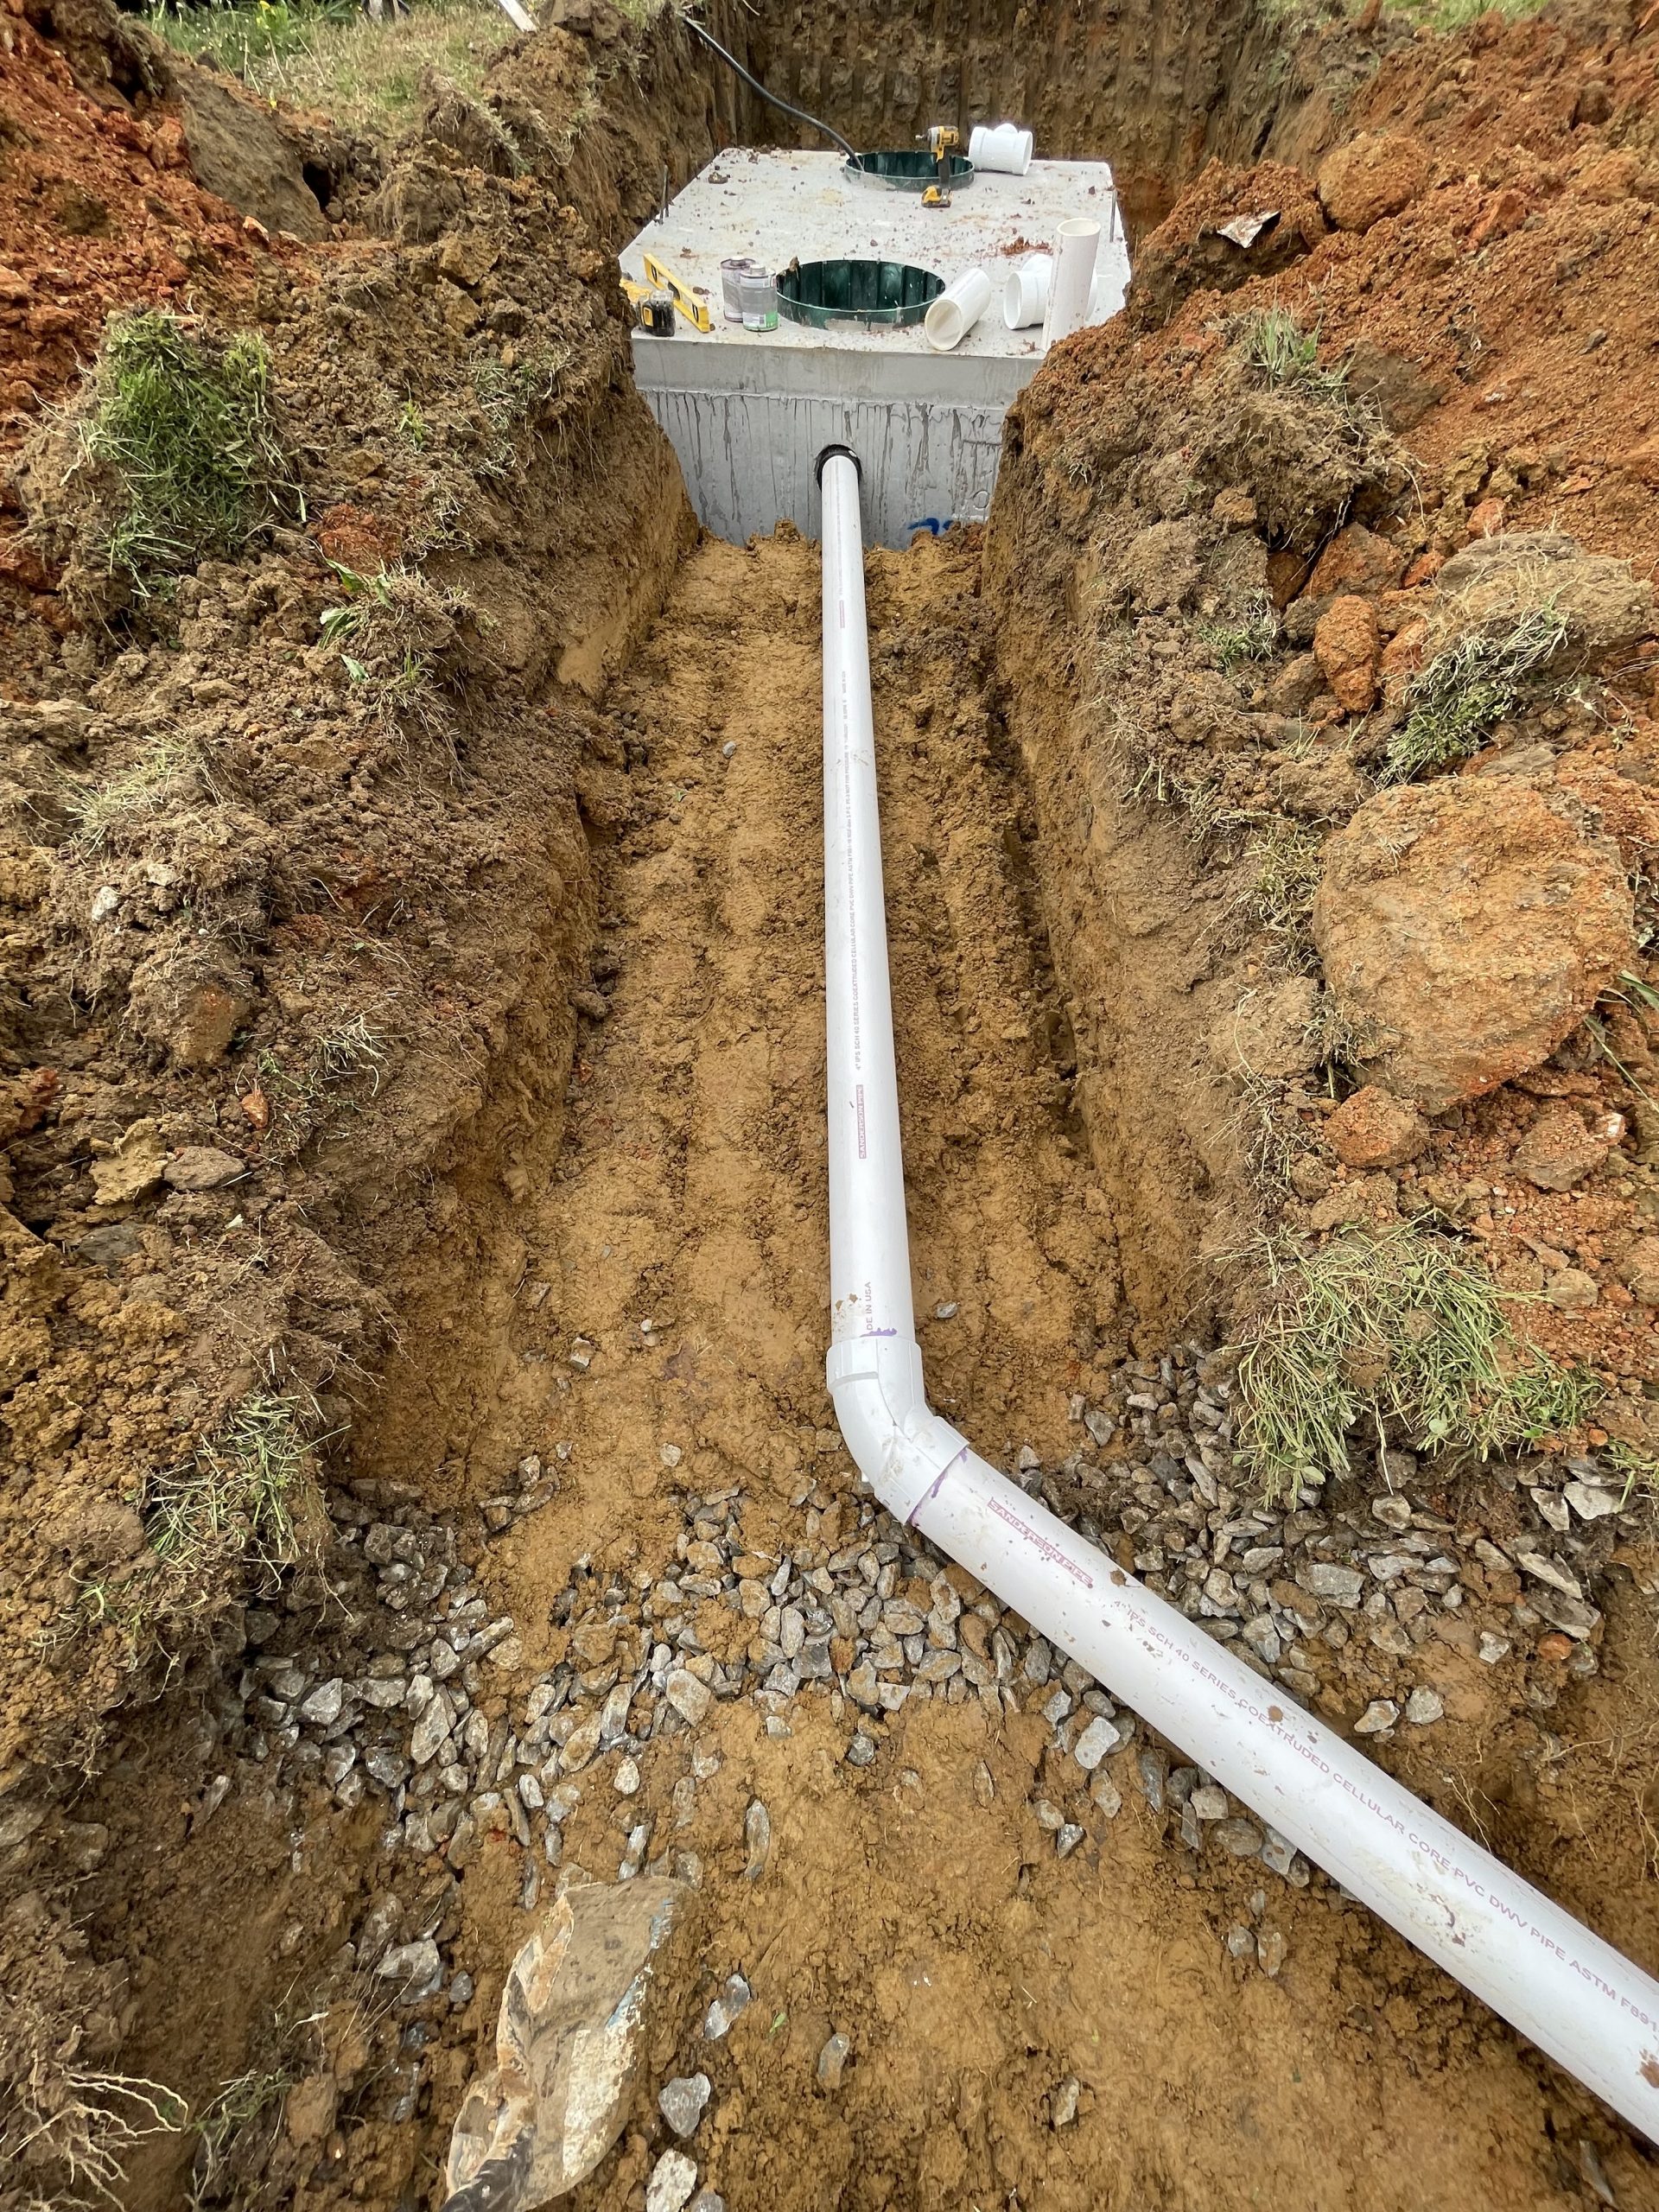 Elitte Septic Tank & Grease Trap